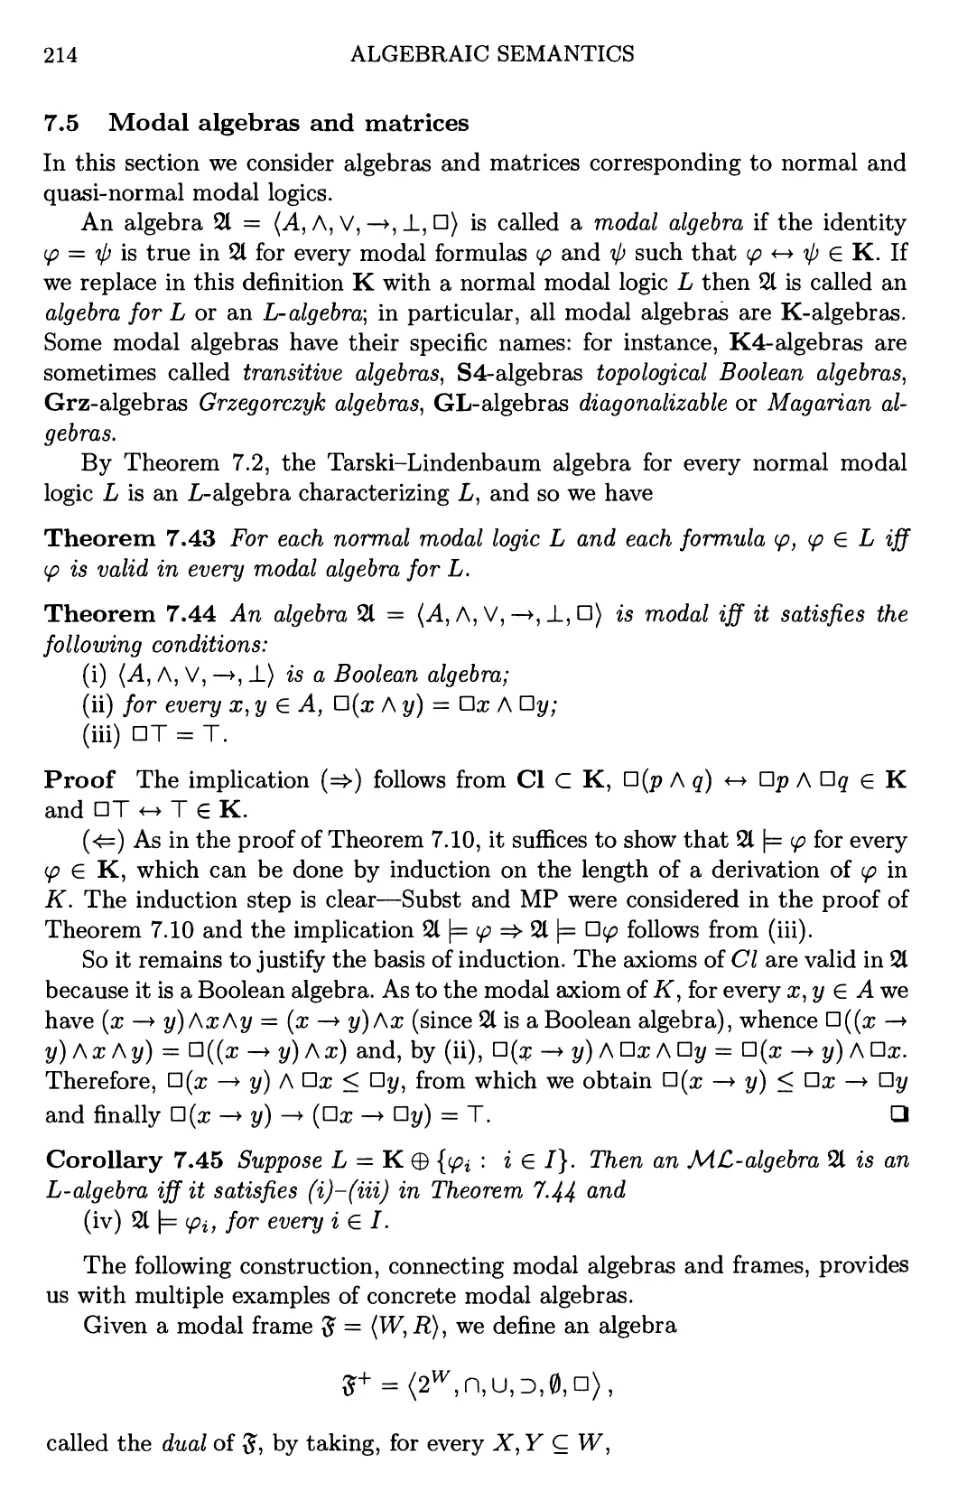 7.5 Modal algebras and matrices